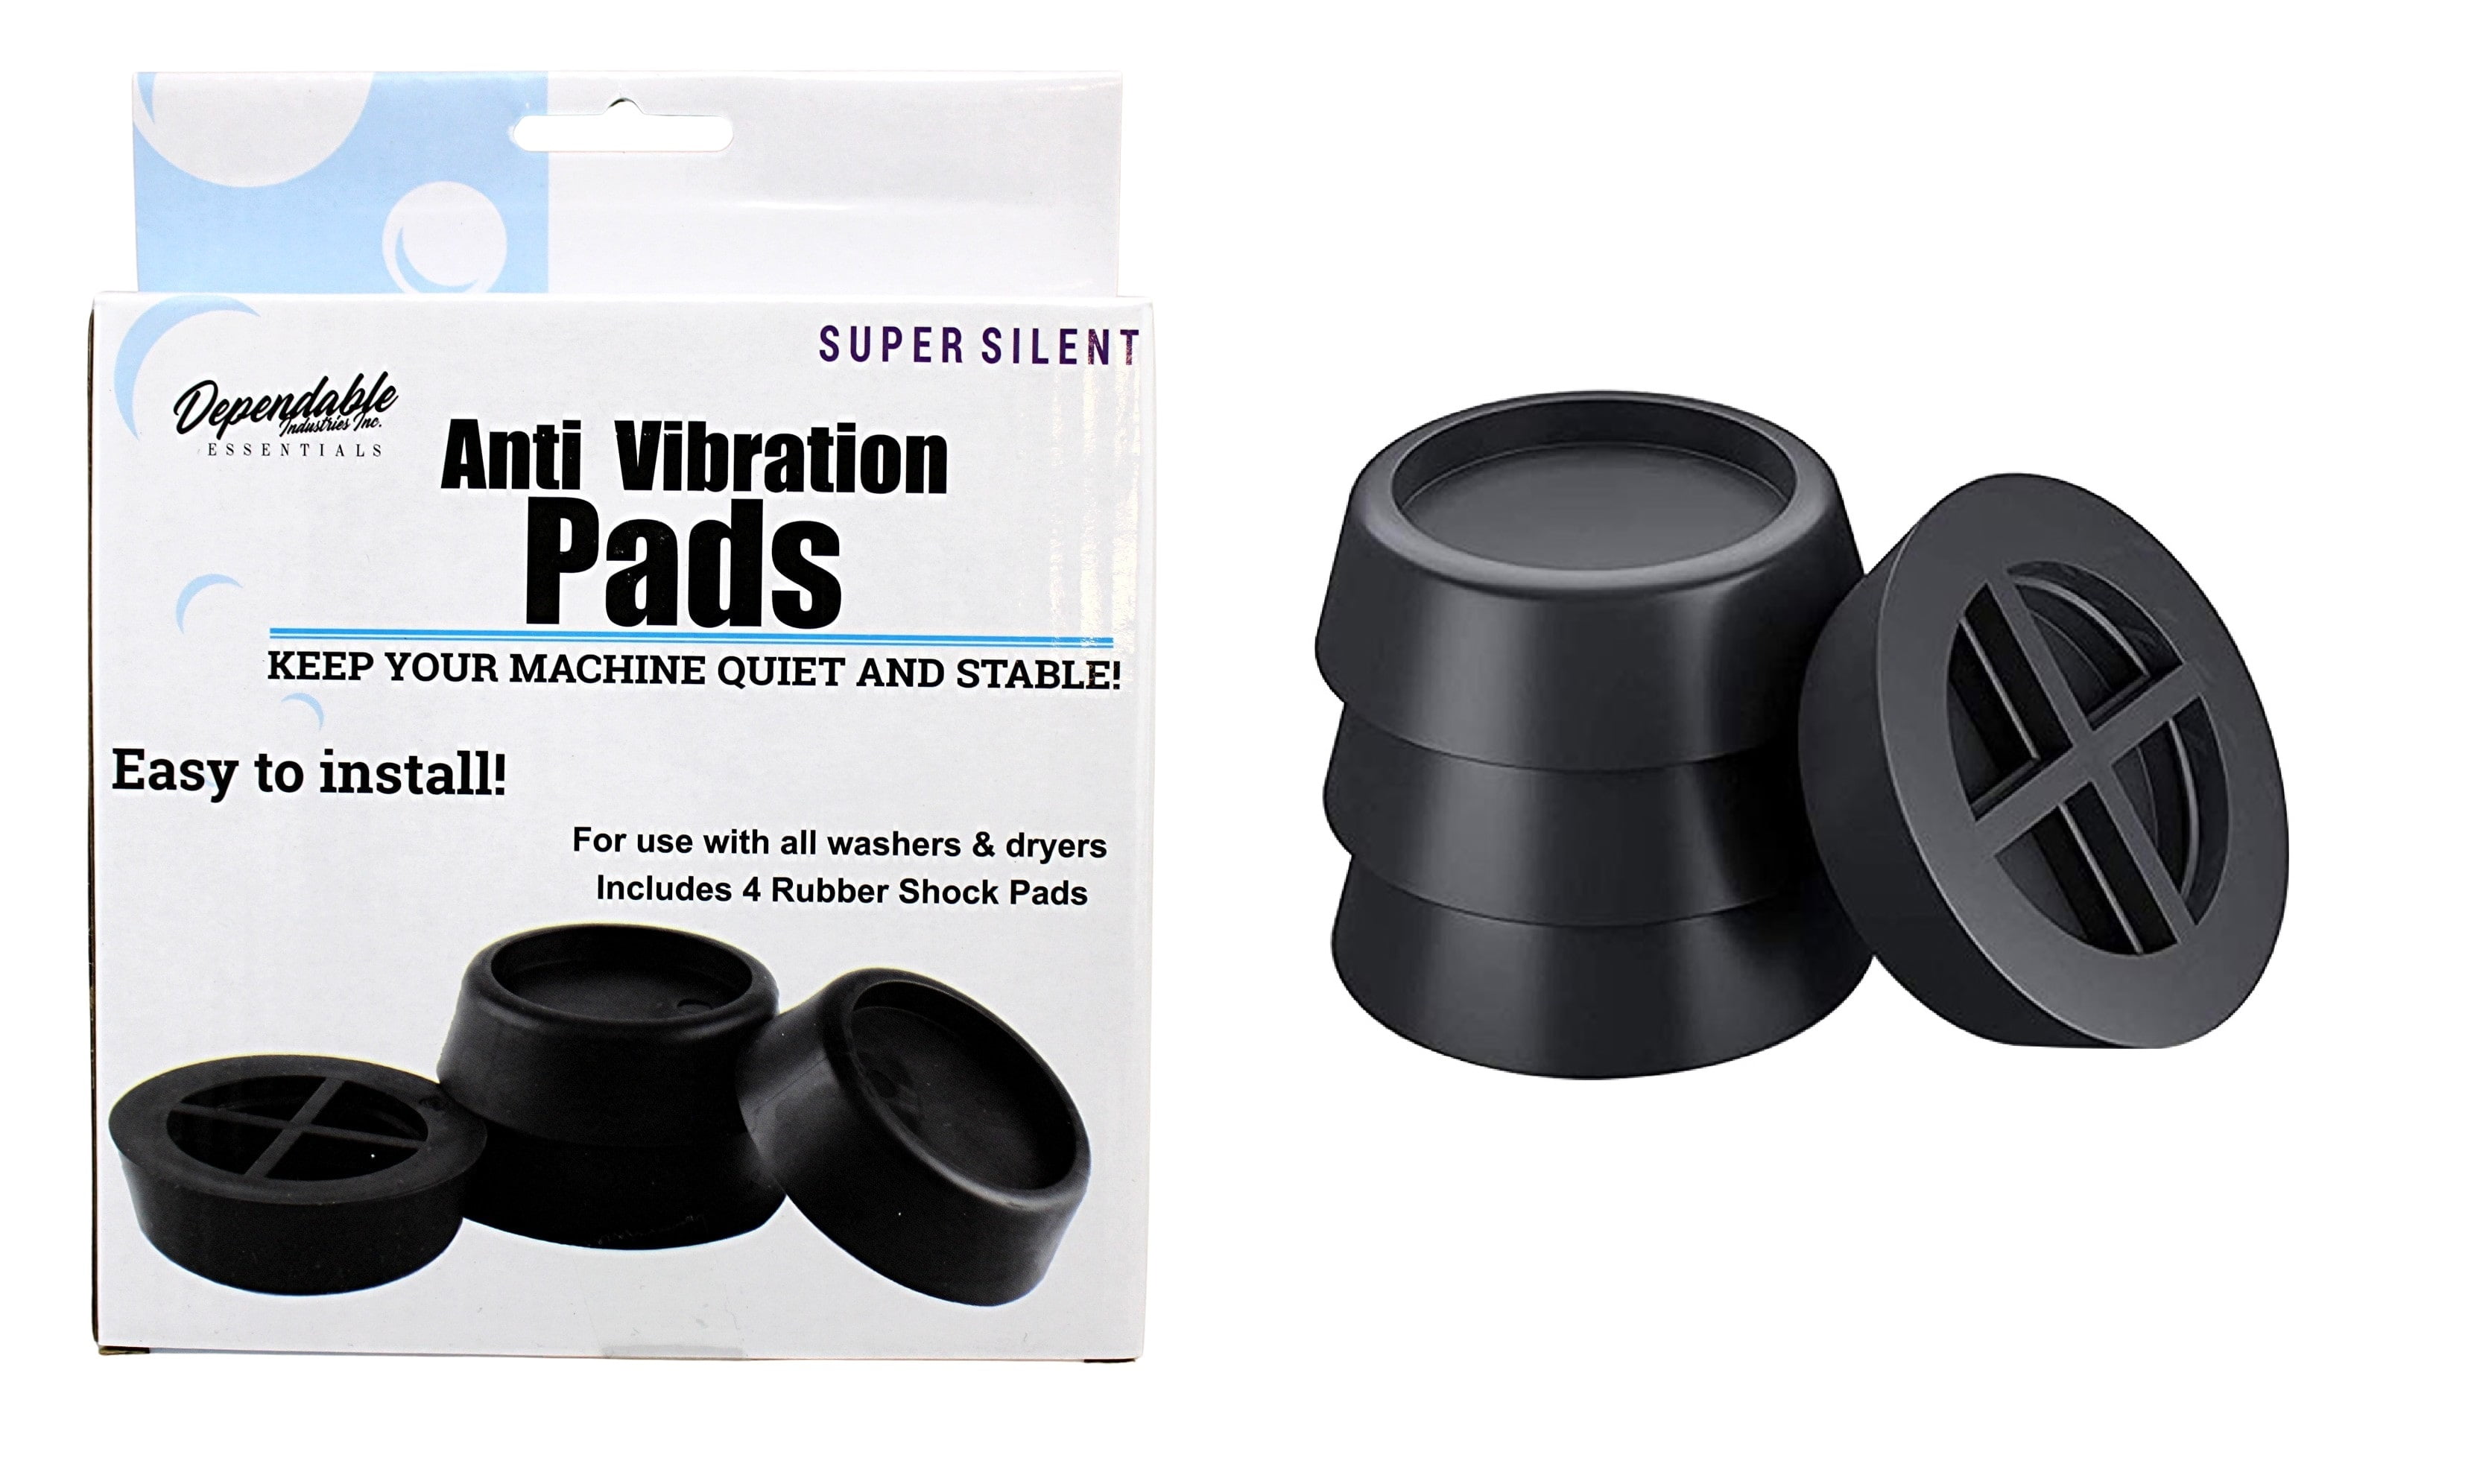 Anti-Vibration Pads for Machines